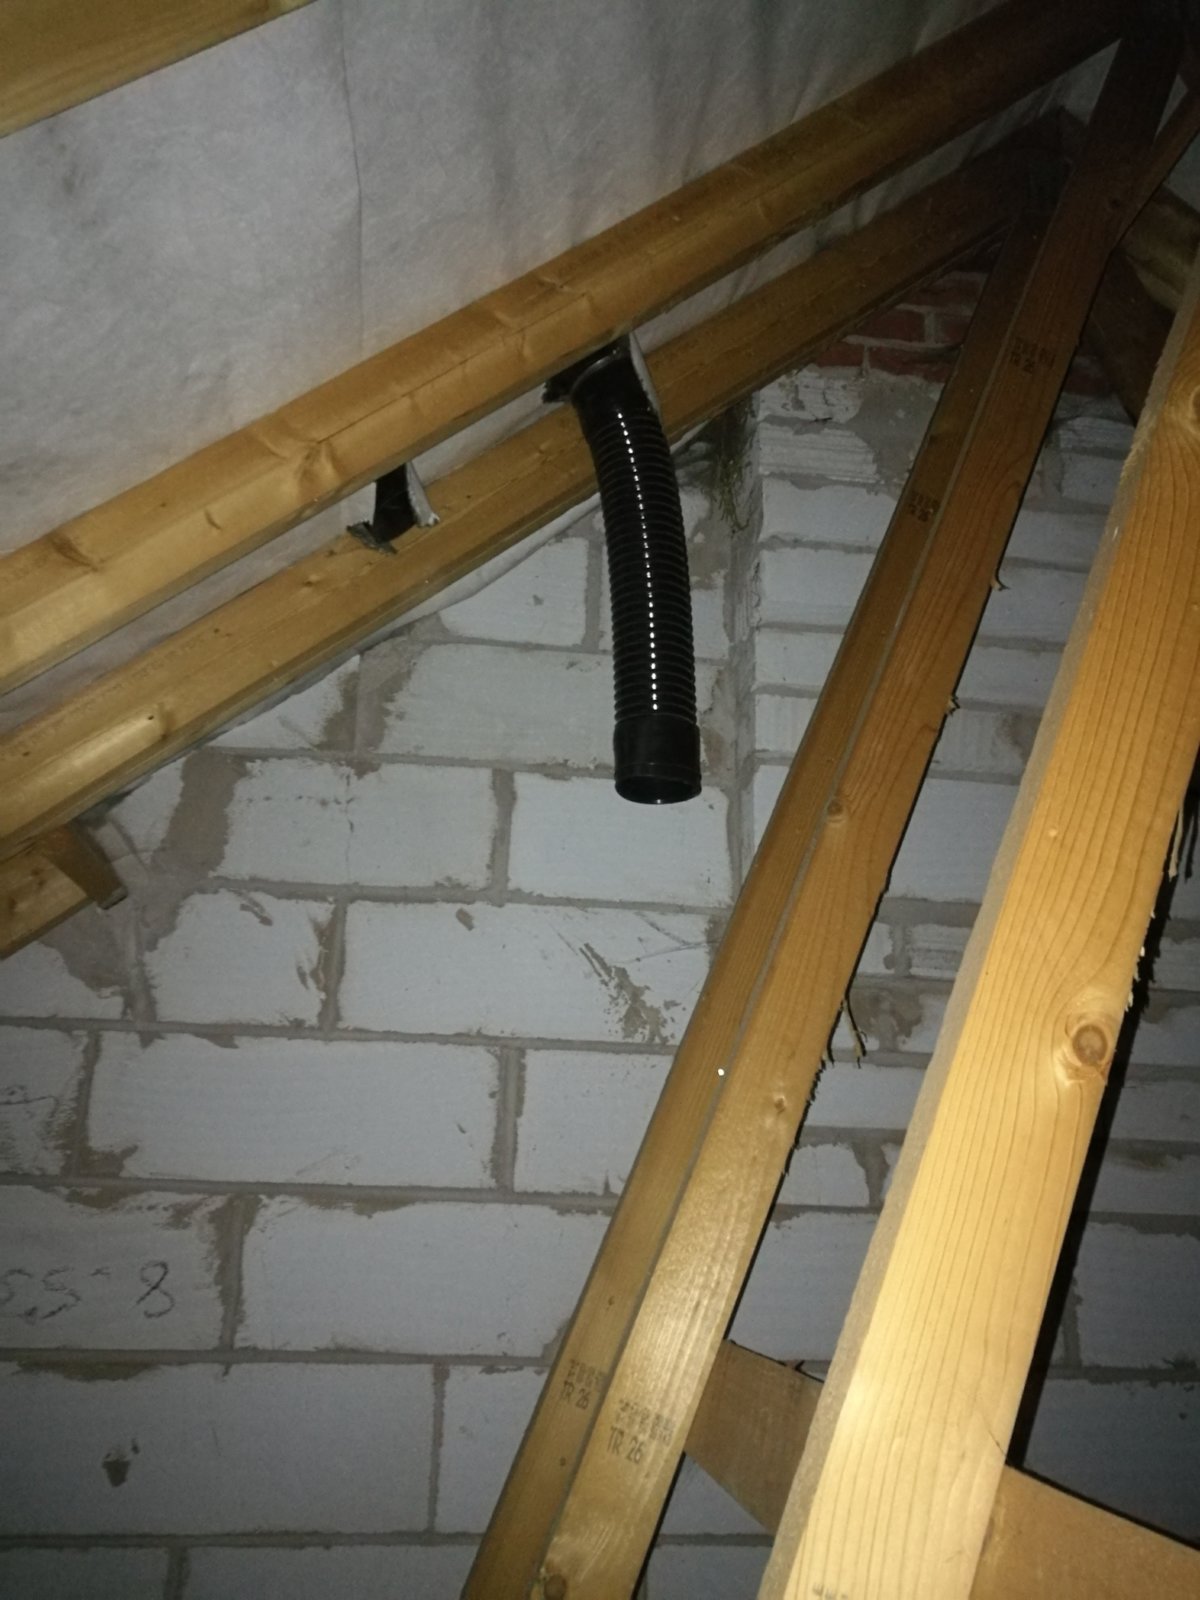 Soil Stack Extractor Fan Venting To, Can You Vent Bathroom Fan Into Soil Pipe